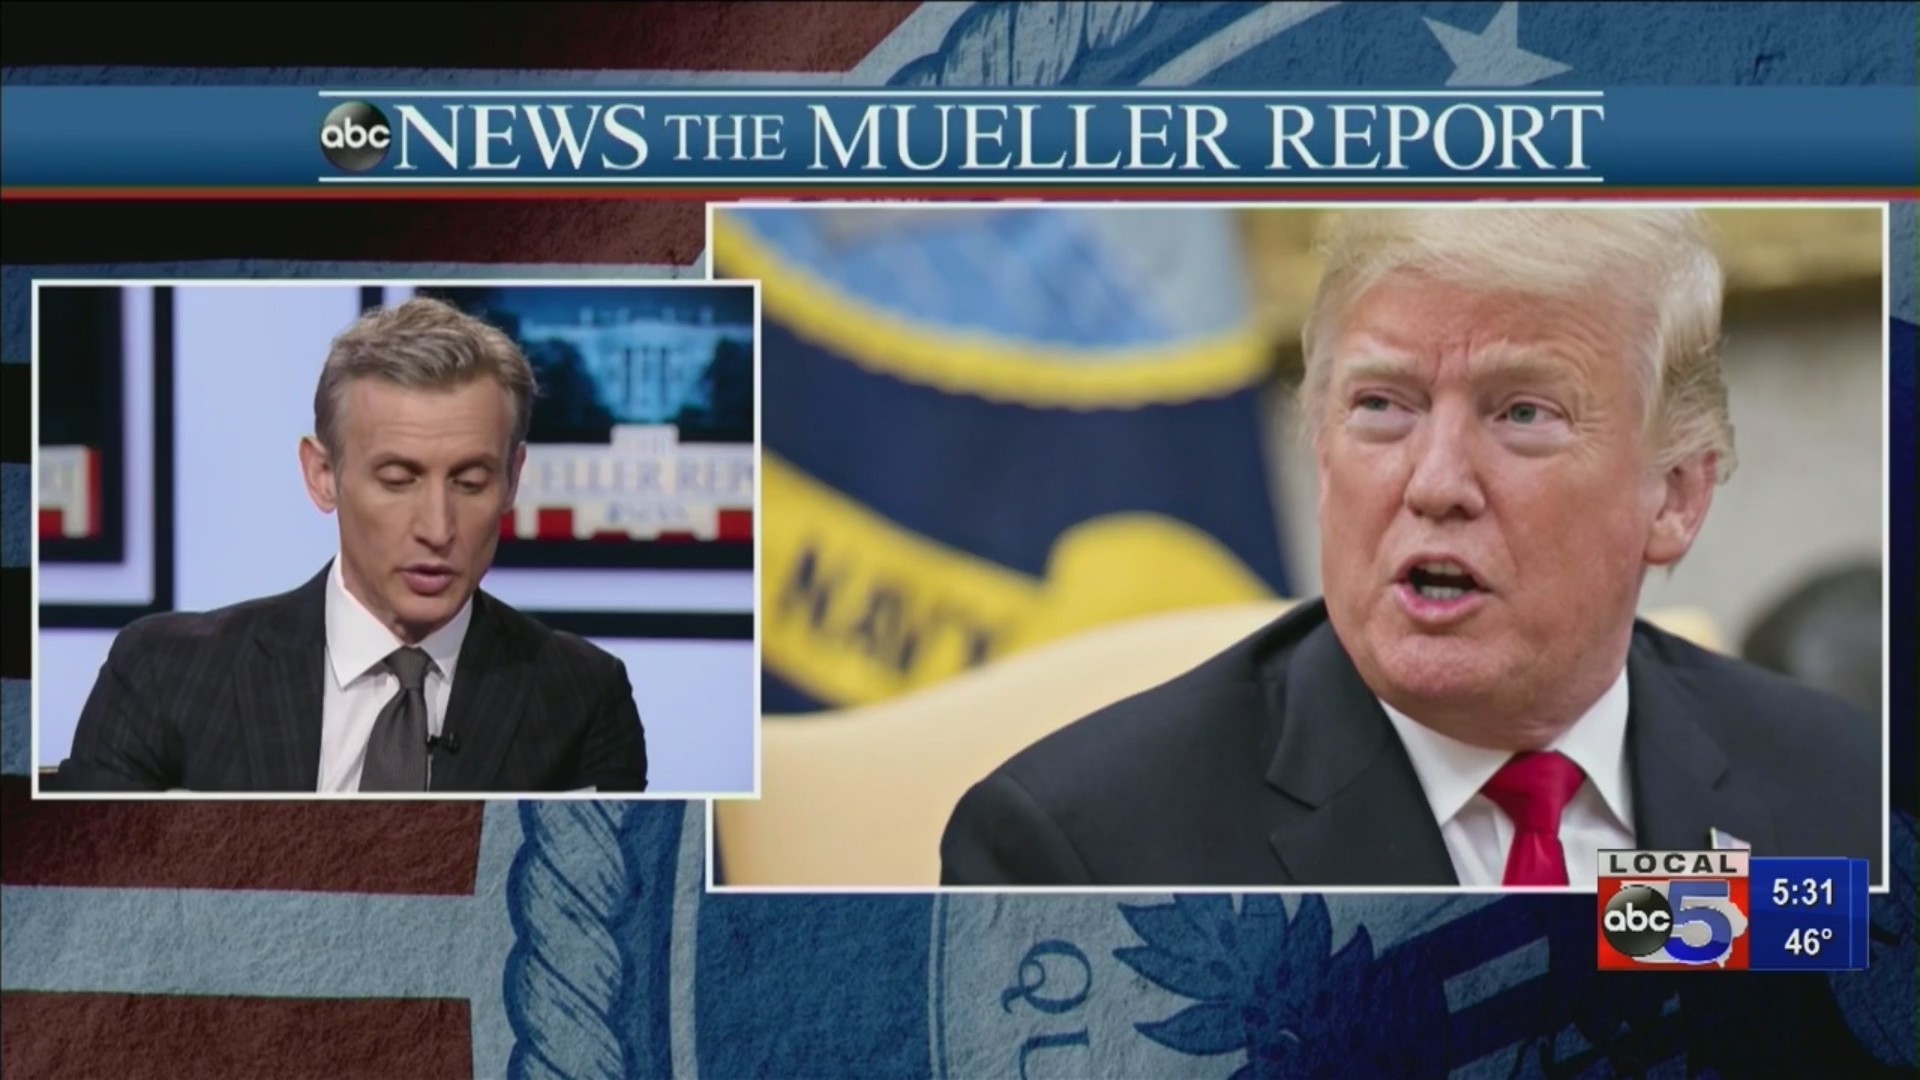 No collusion with Russia, that's the big news from the Mueller report.

The Attorney General William Barr determining from the report there was no obstruction of justice from the president.